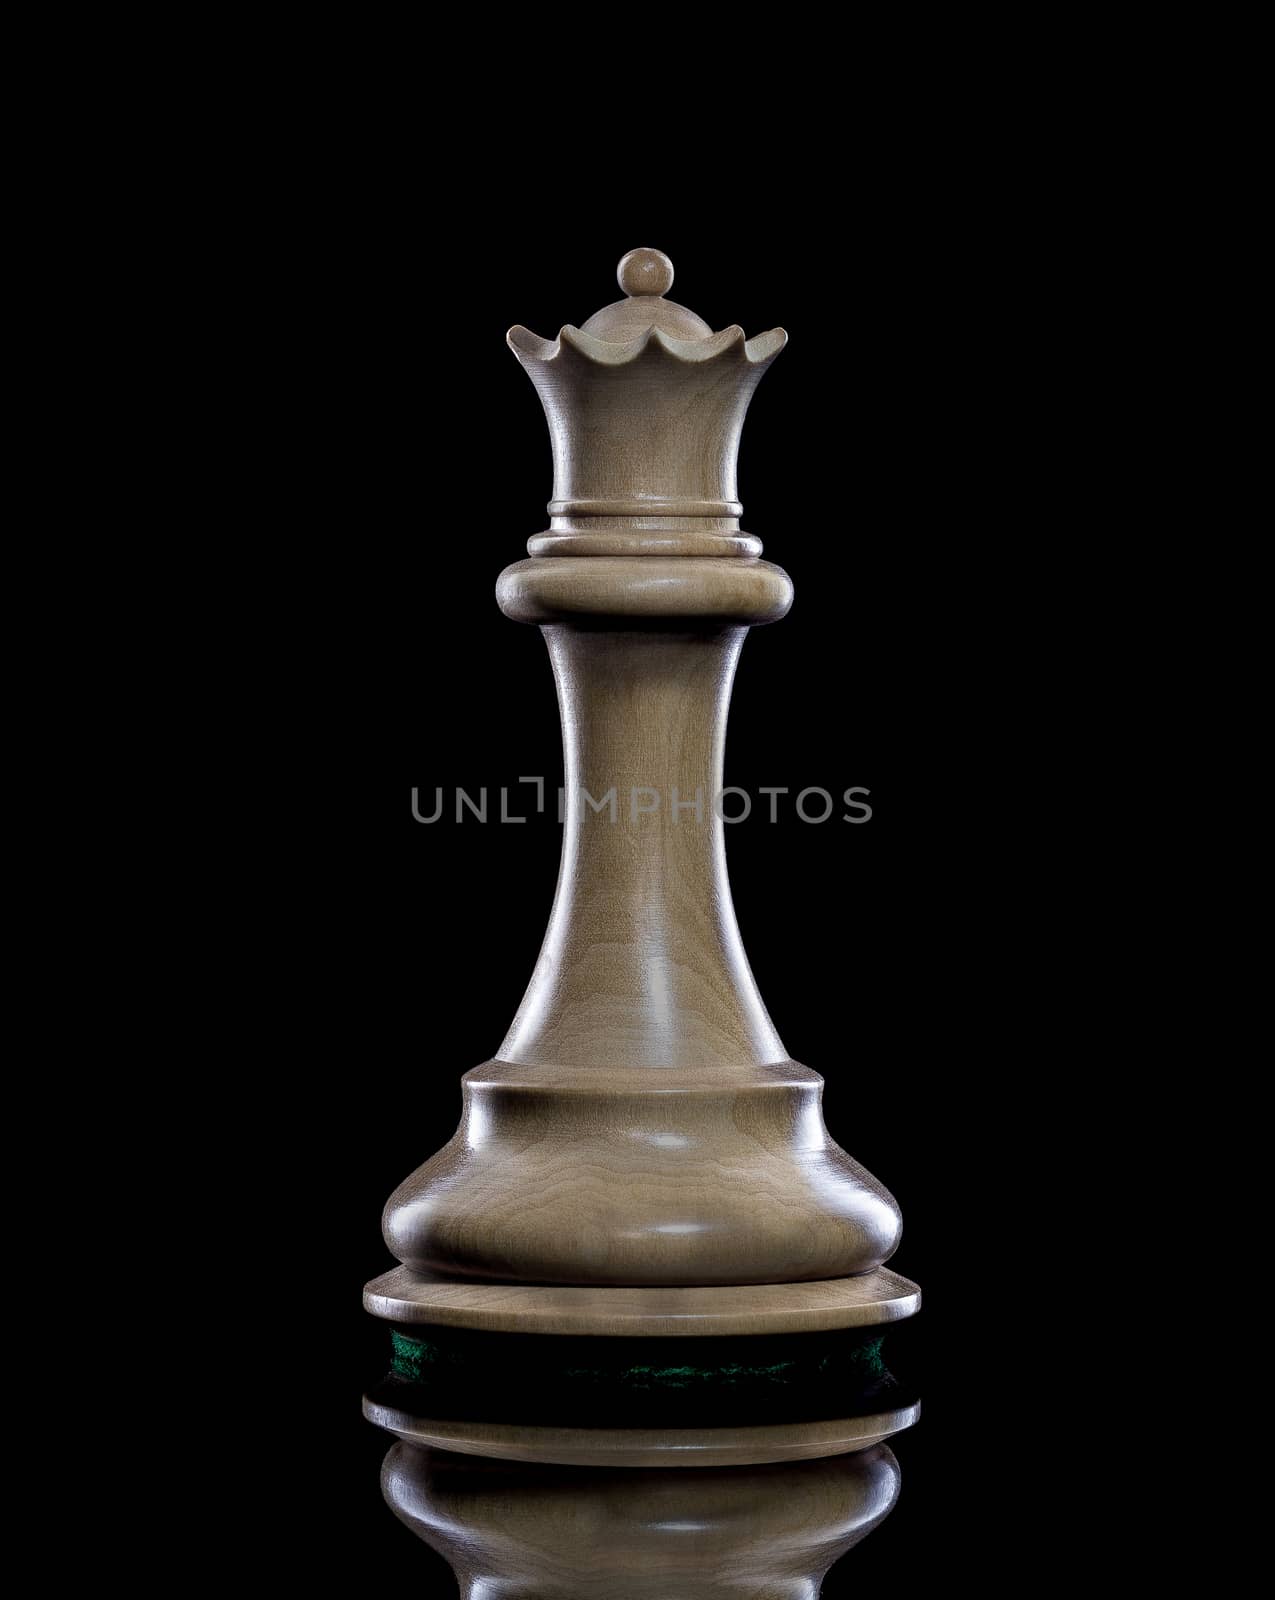 Black and White Queen of chess setup on dark background . Leader by kerdkanno